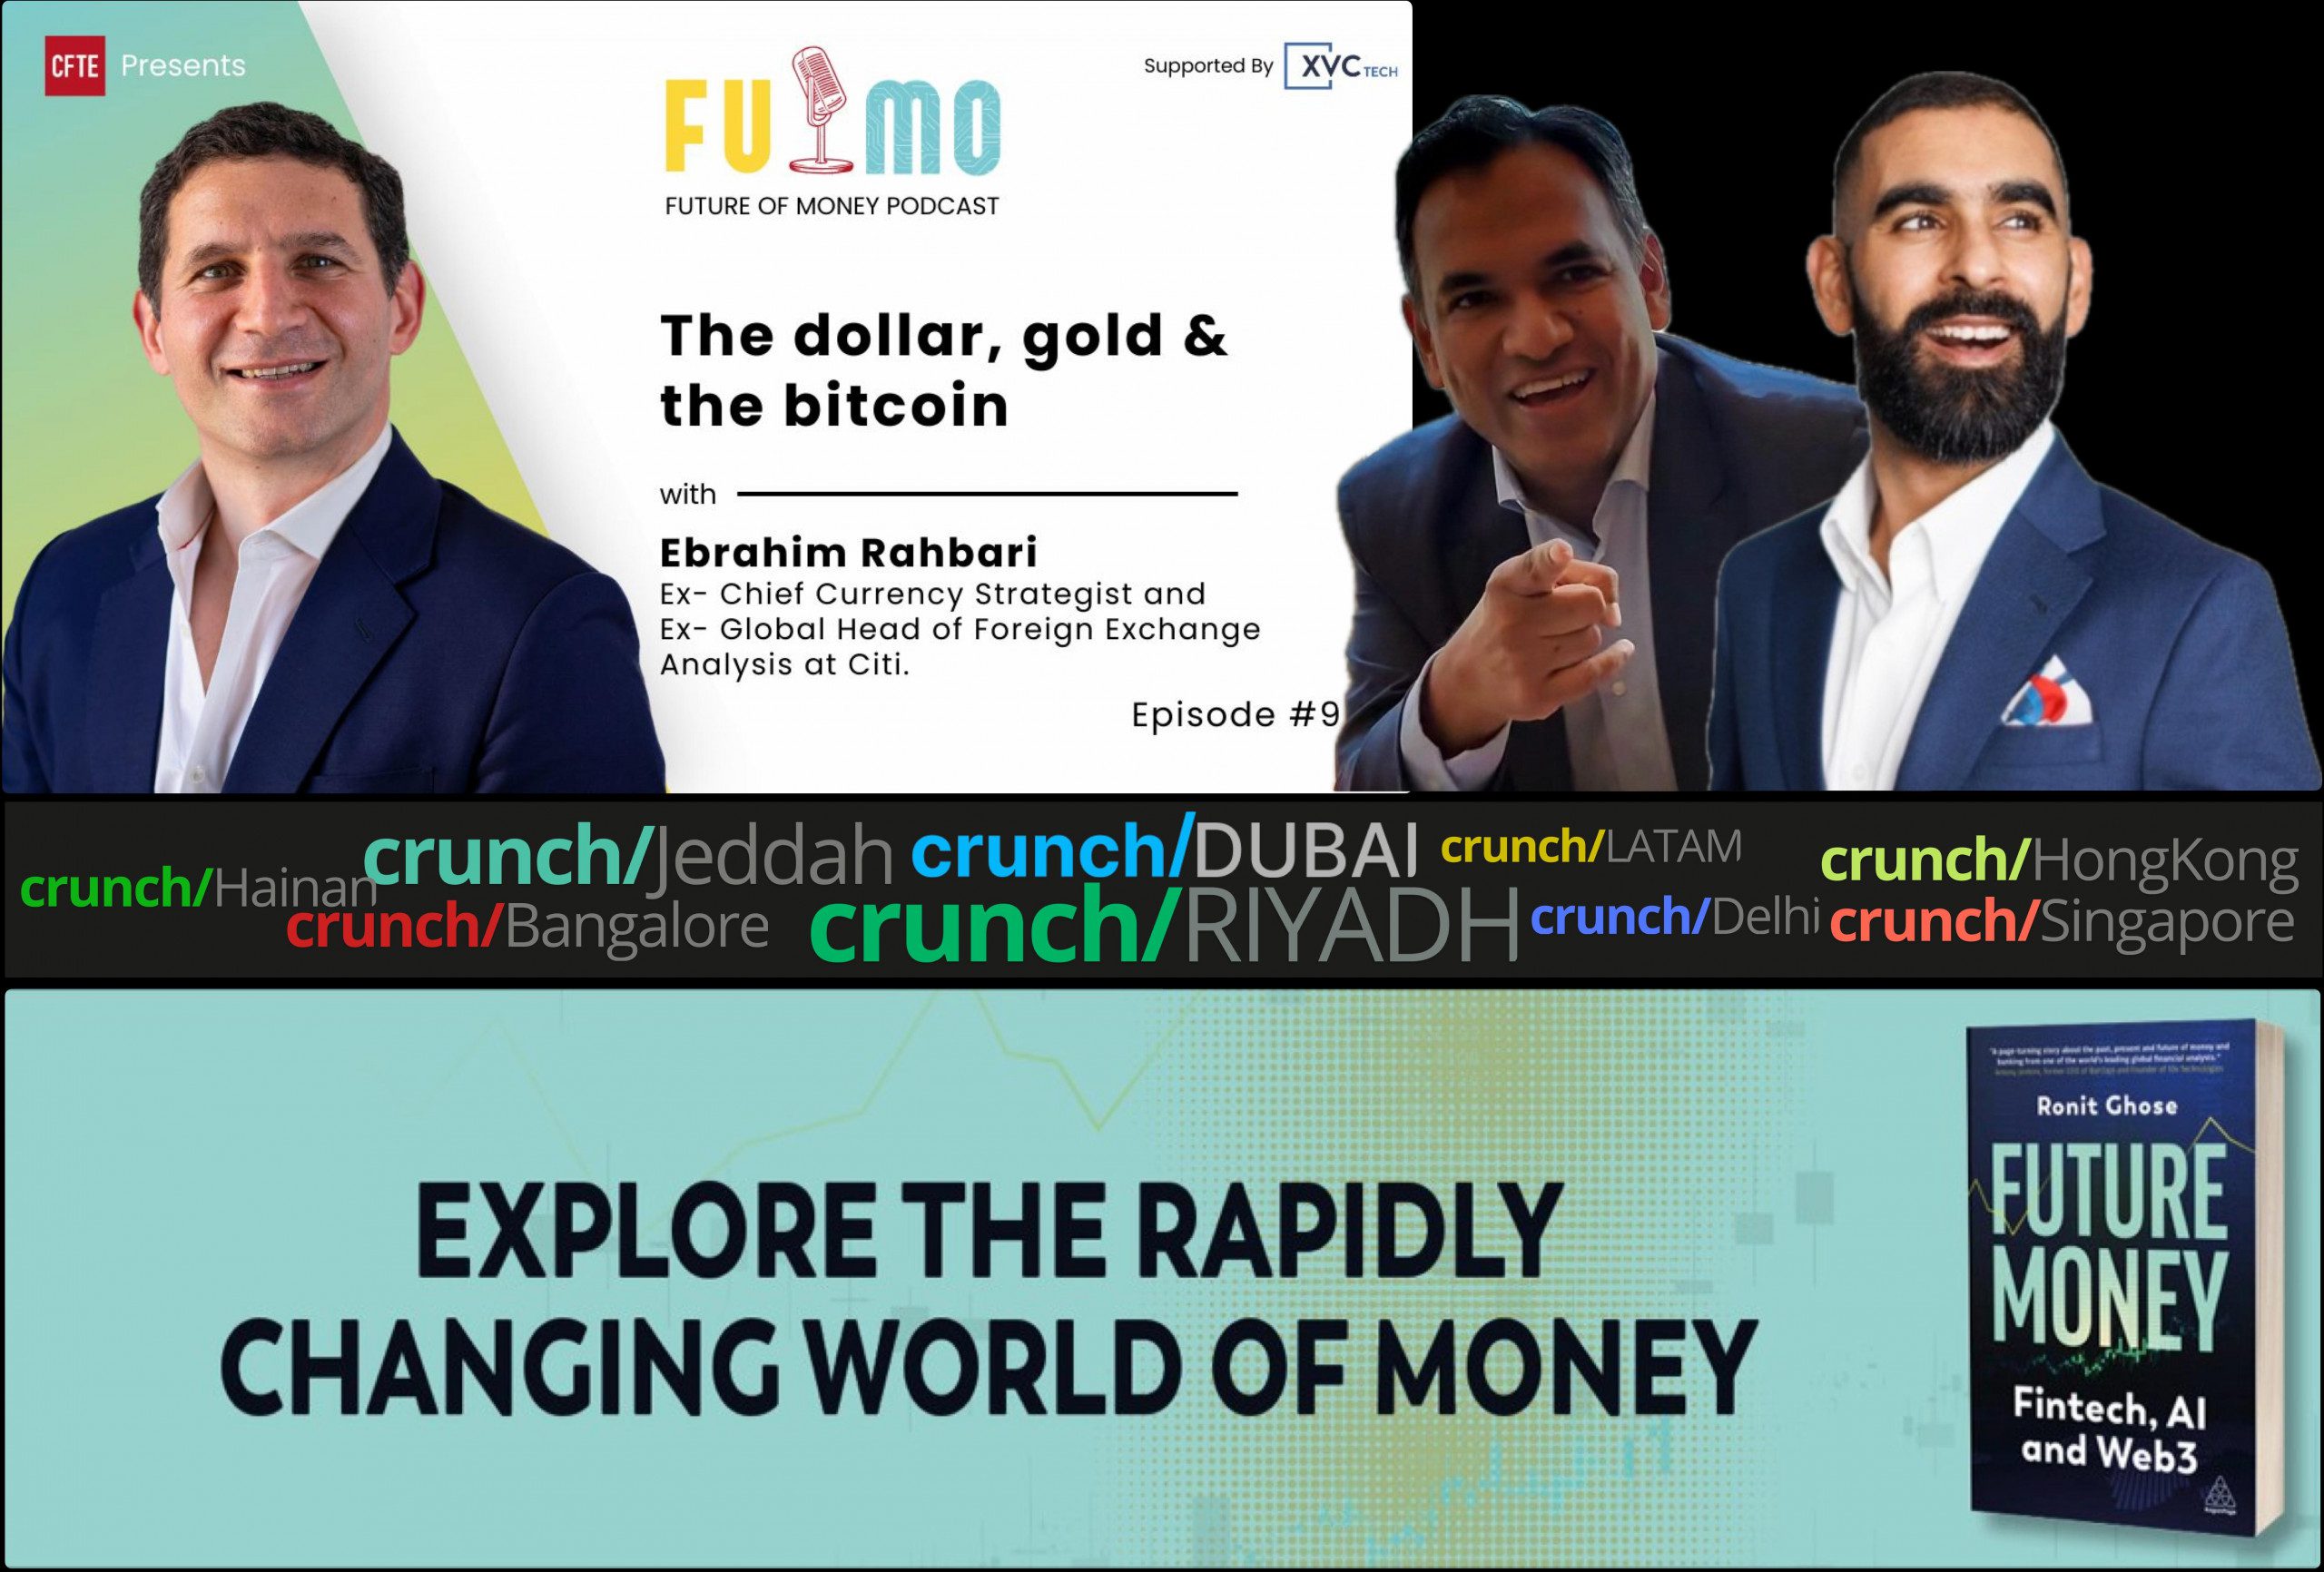 Future of Money Podcast hosted by Ronit Ghose and Gaurav Dhar Guest Ebrahim Rahbari- The dollar gold and the bitcoin v2